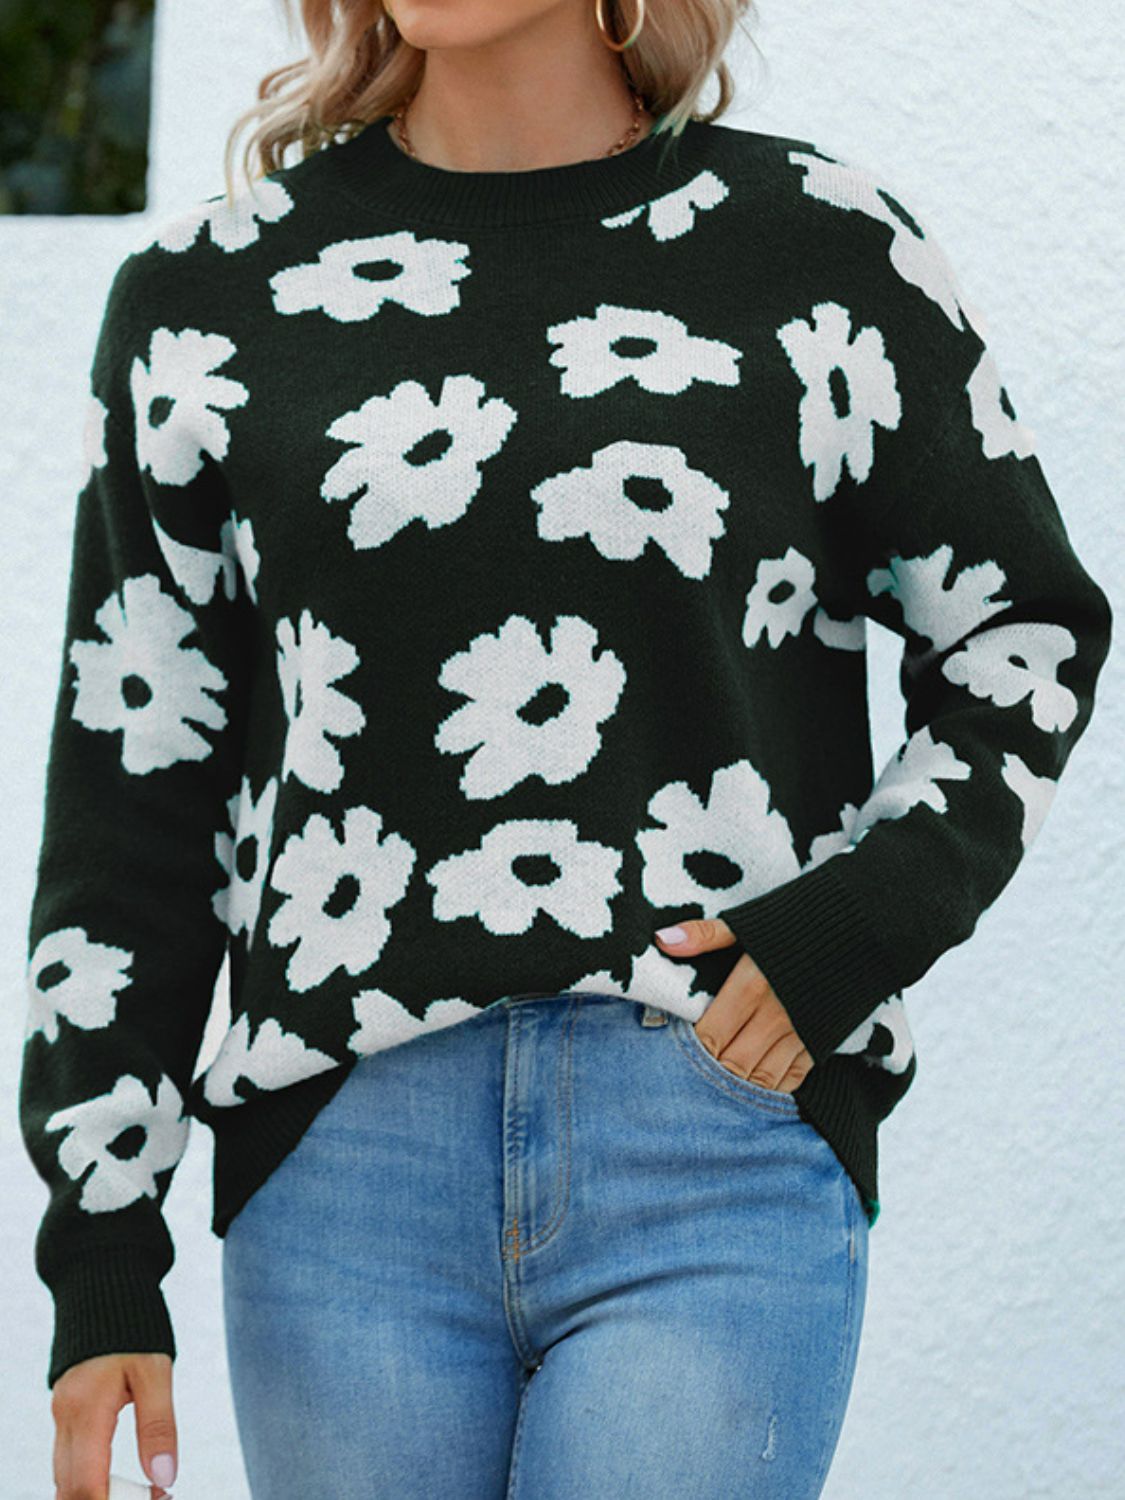 Knit Daisy Retro Flower Pullover Classic Long Sleeve Round Neck Sweater Shirt